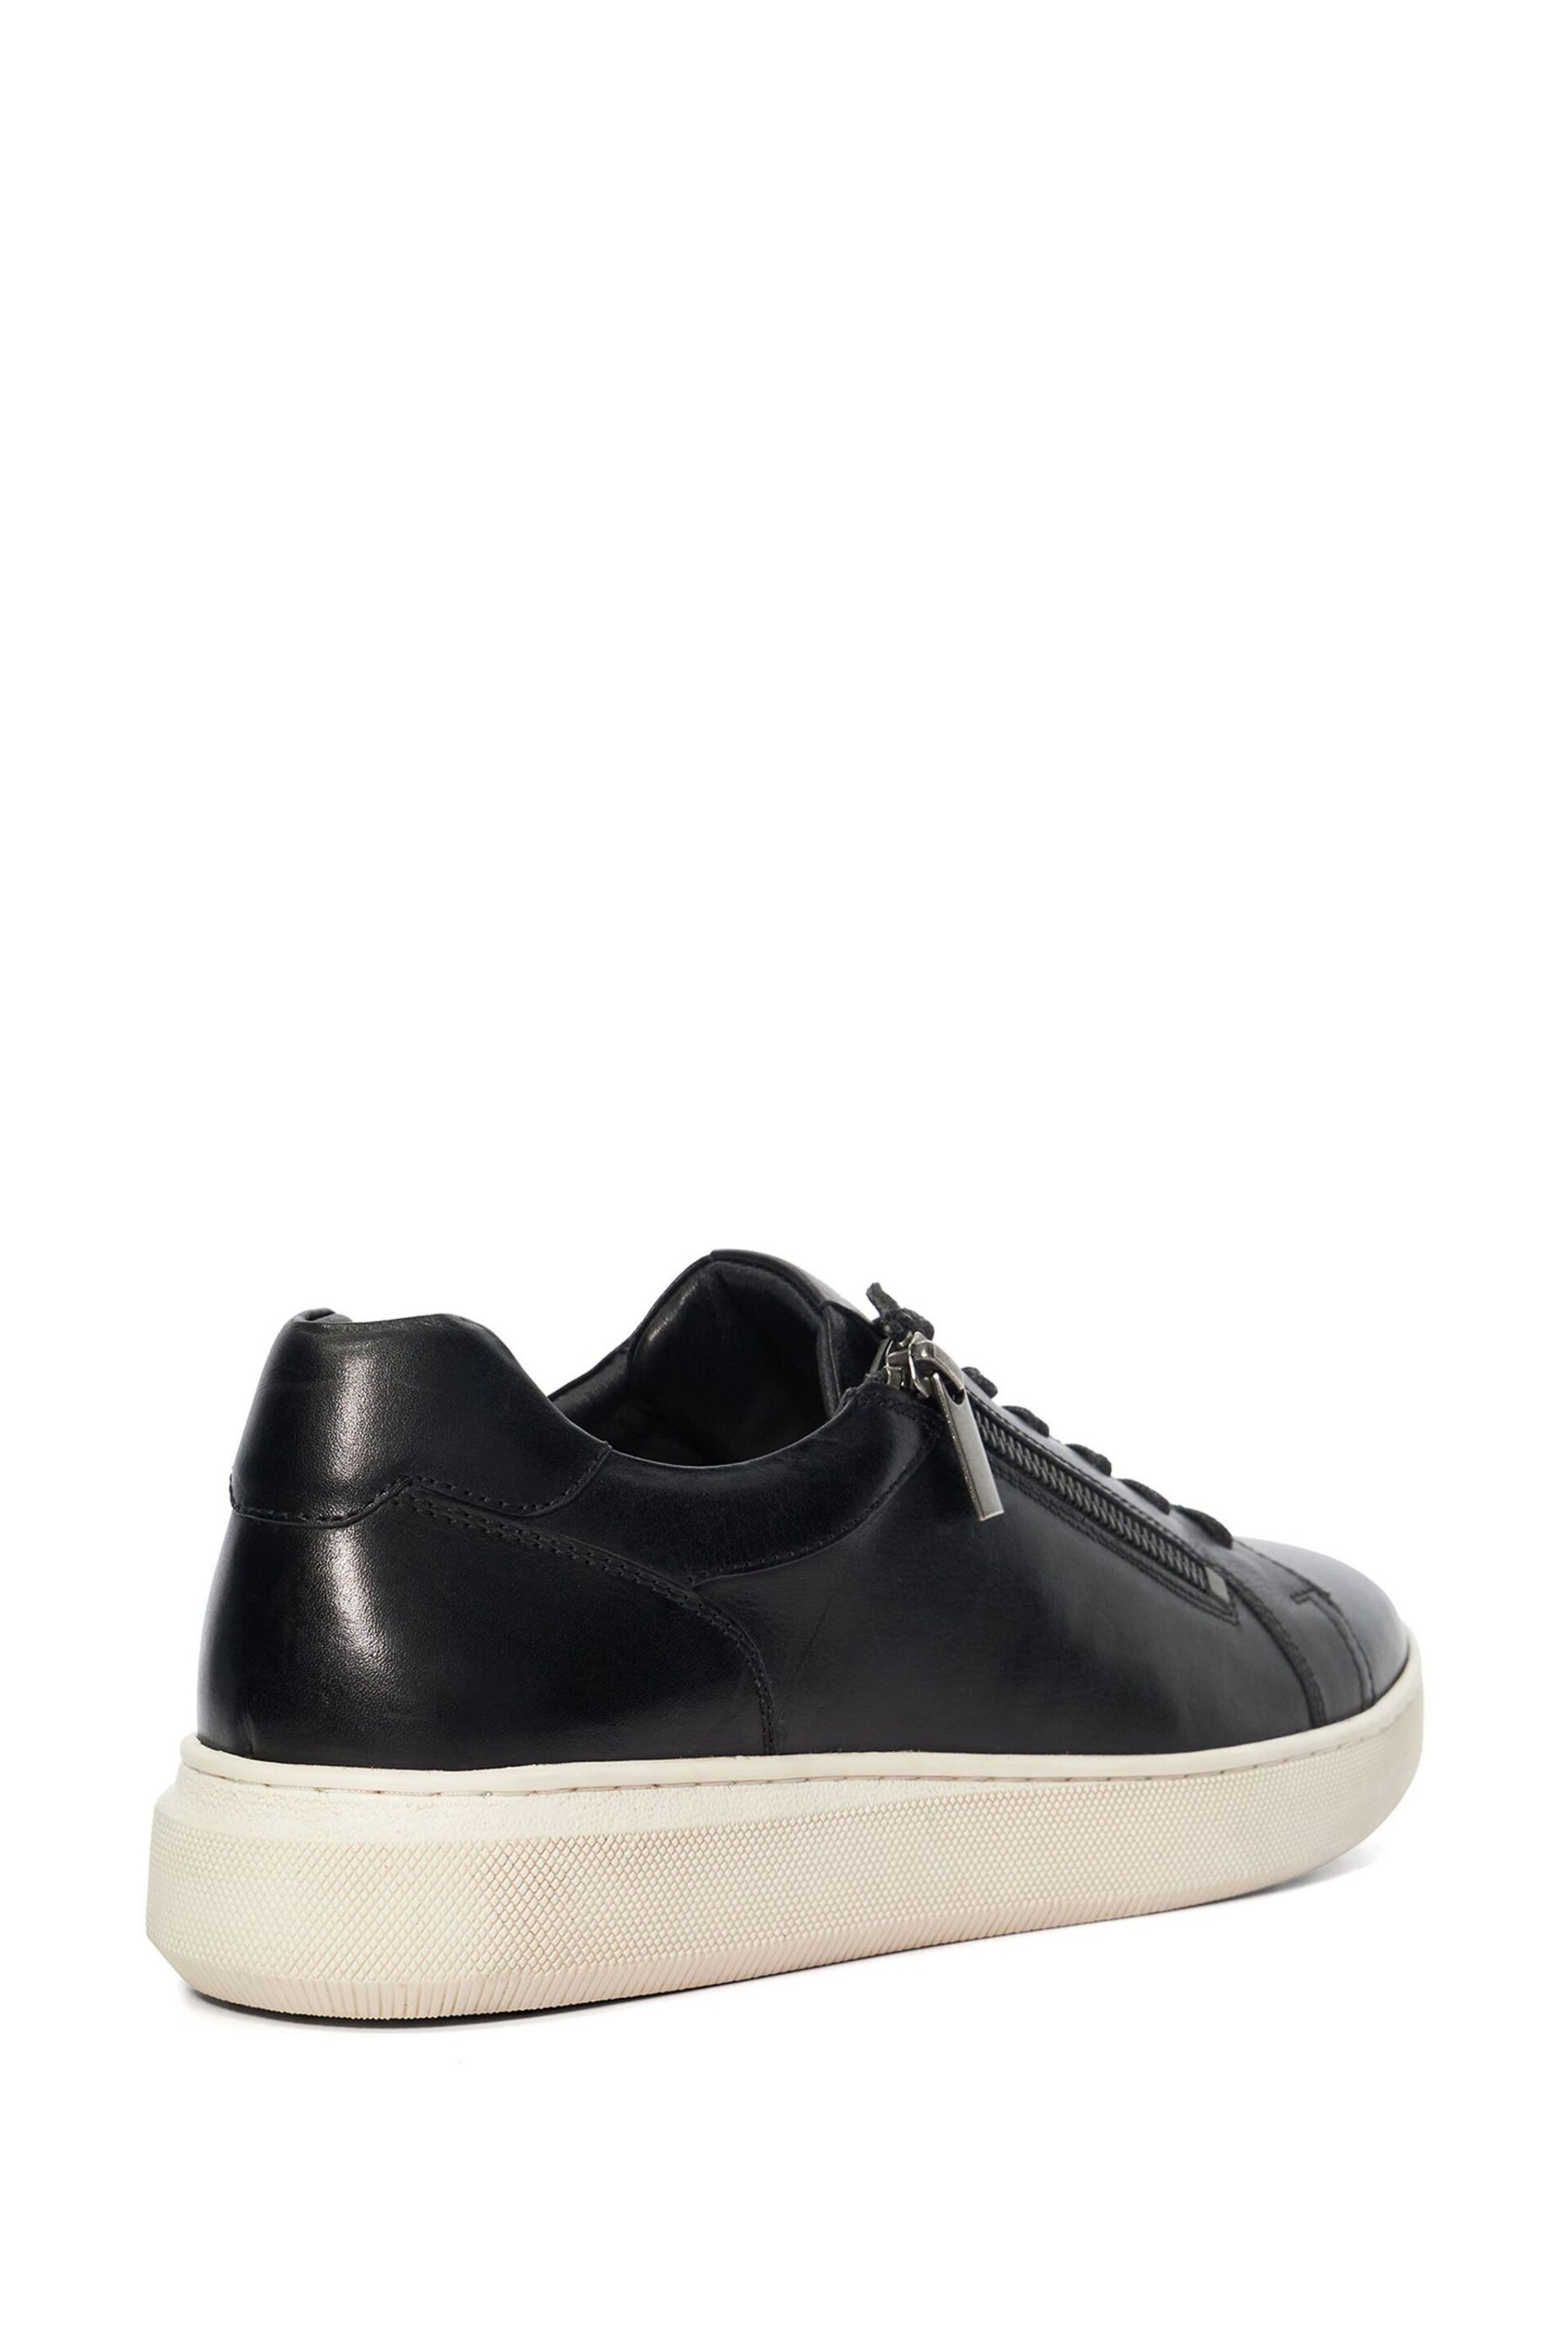 Dune London Black Tribute Zip Detail Cupsole Trainers - Image 4 of 6